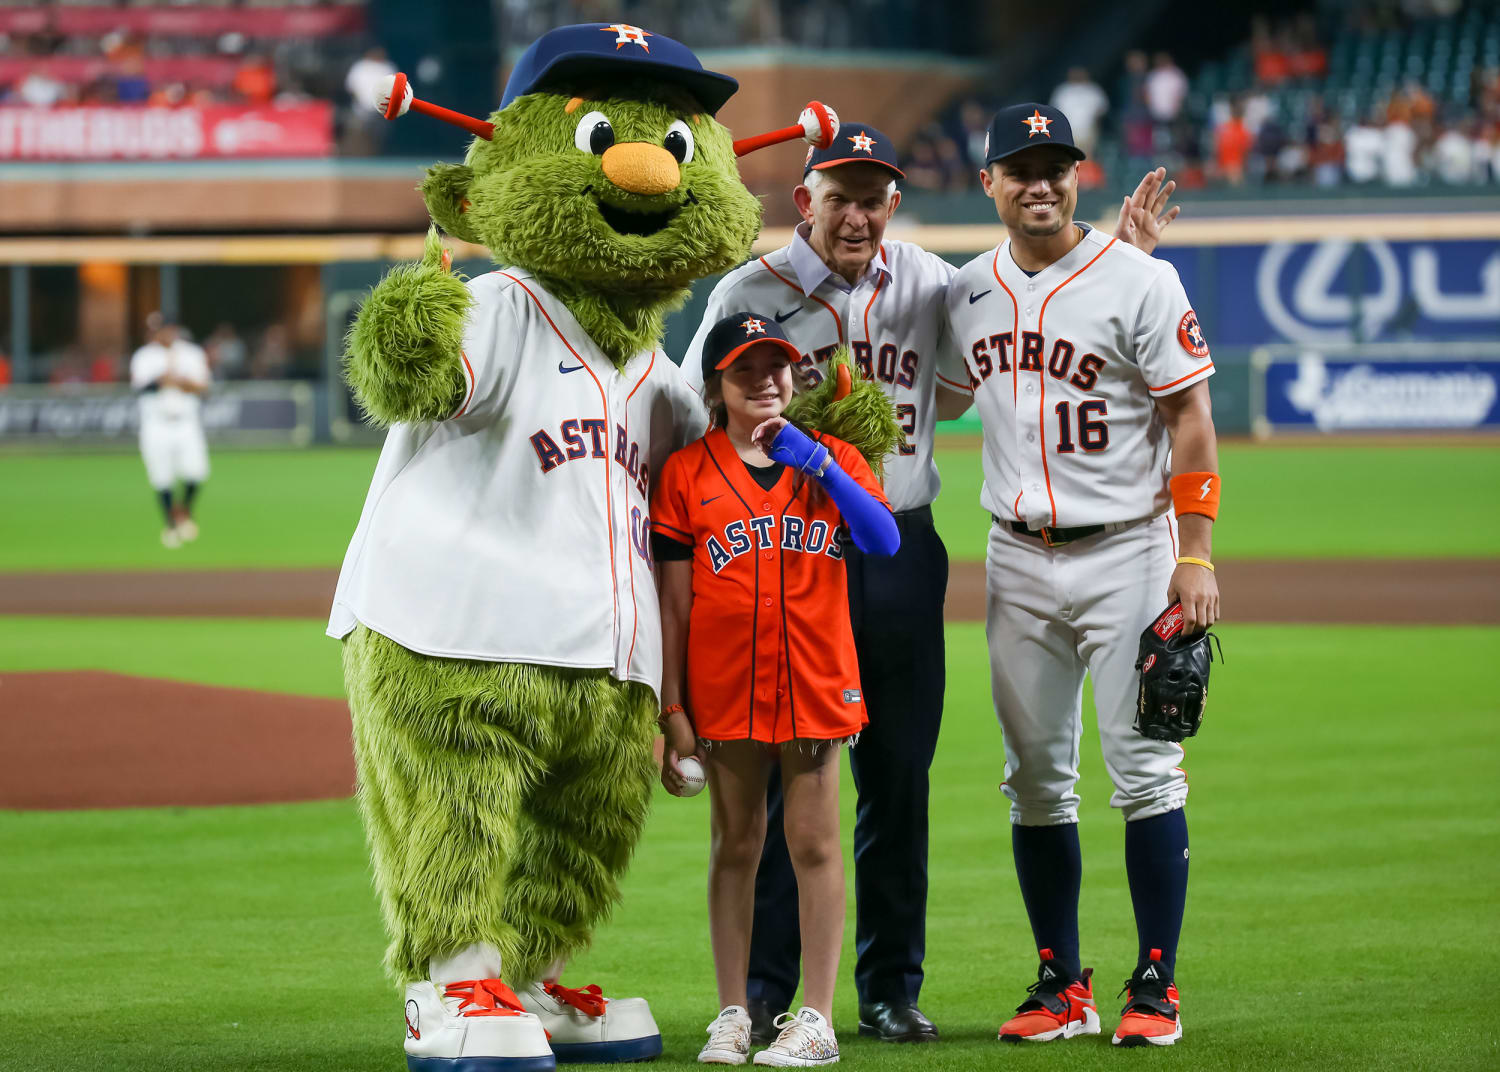 Astros present Bad Bunny with jersey after Minute Maid Park show